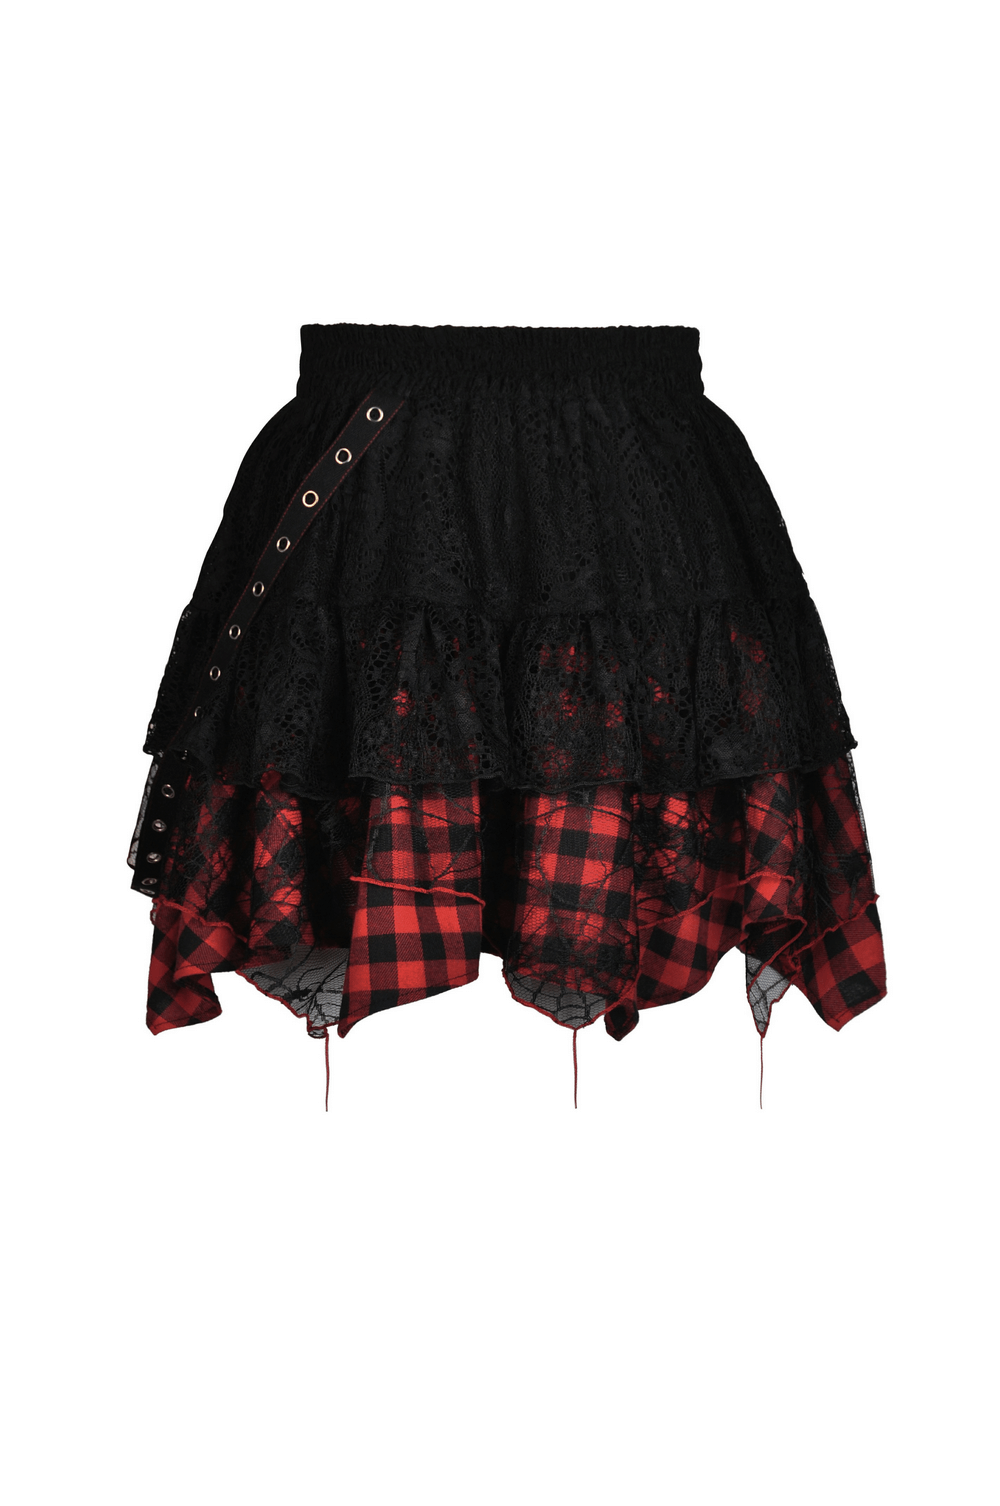 Gothic Irregular Layered Skirt with Plaid and Lace Details